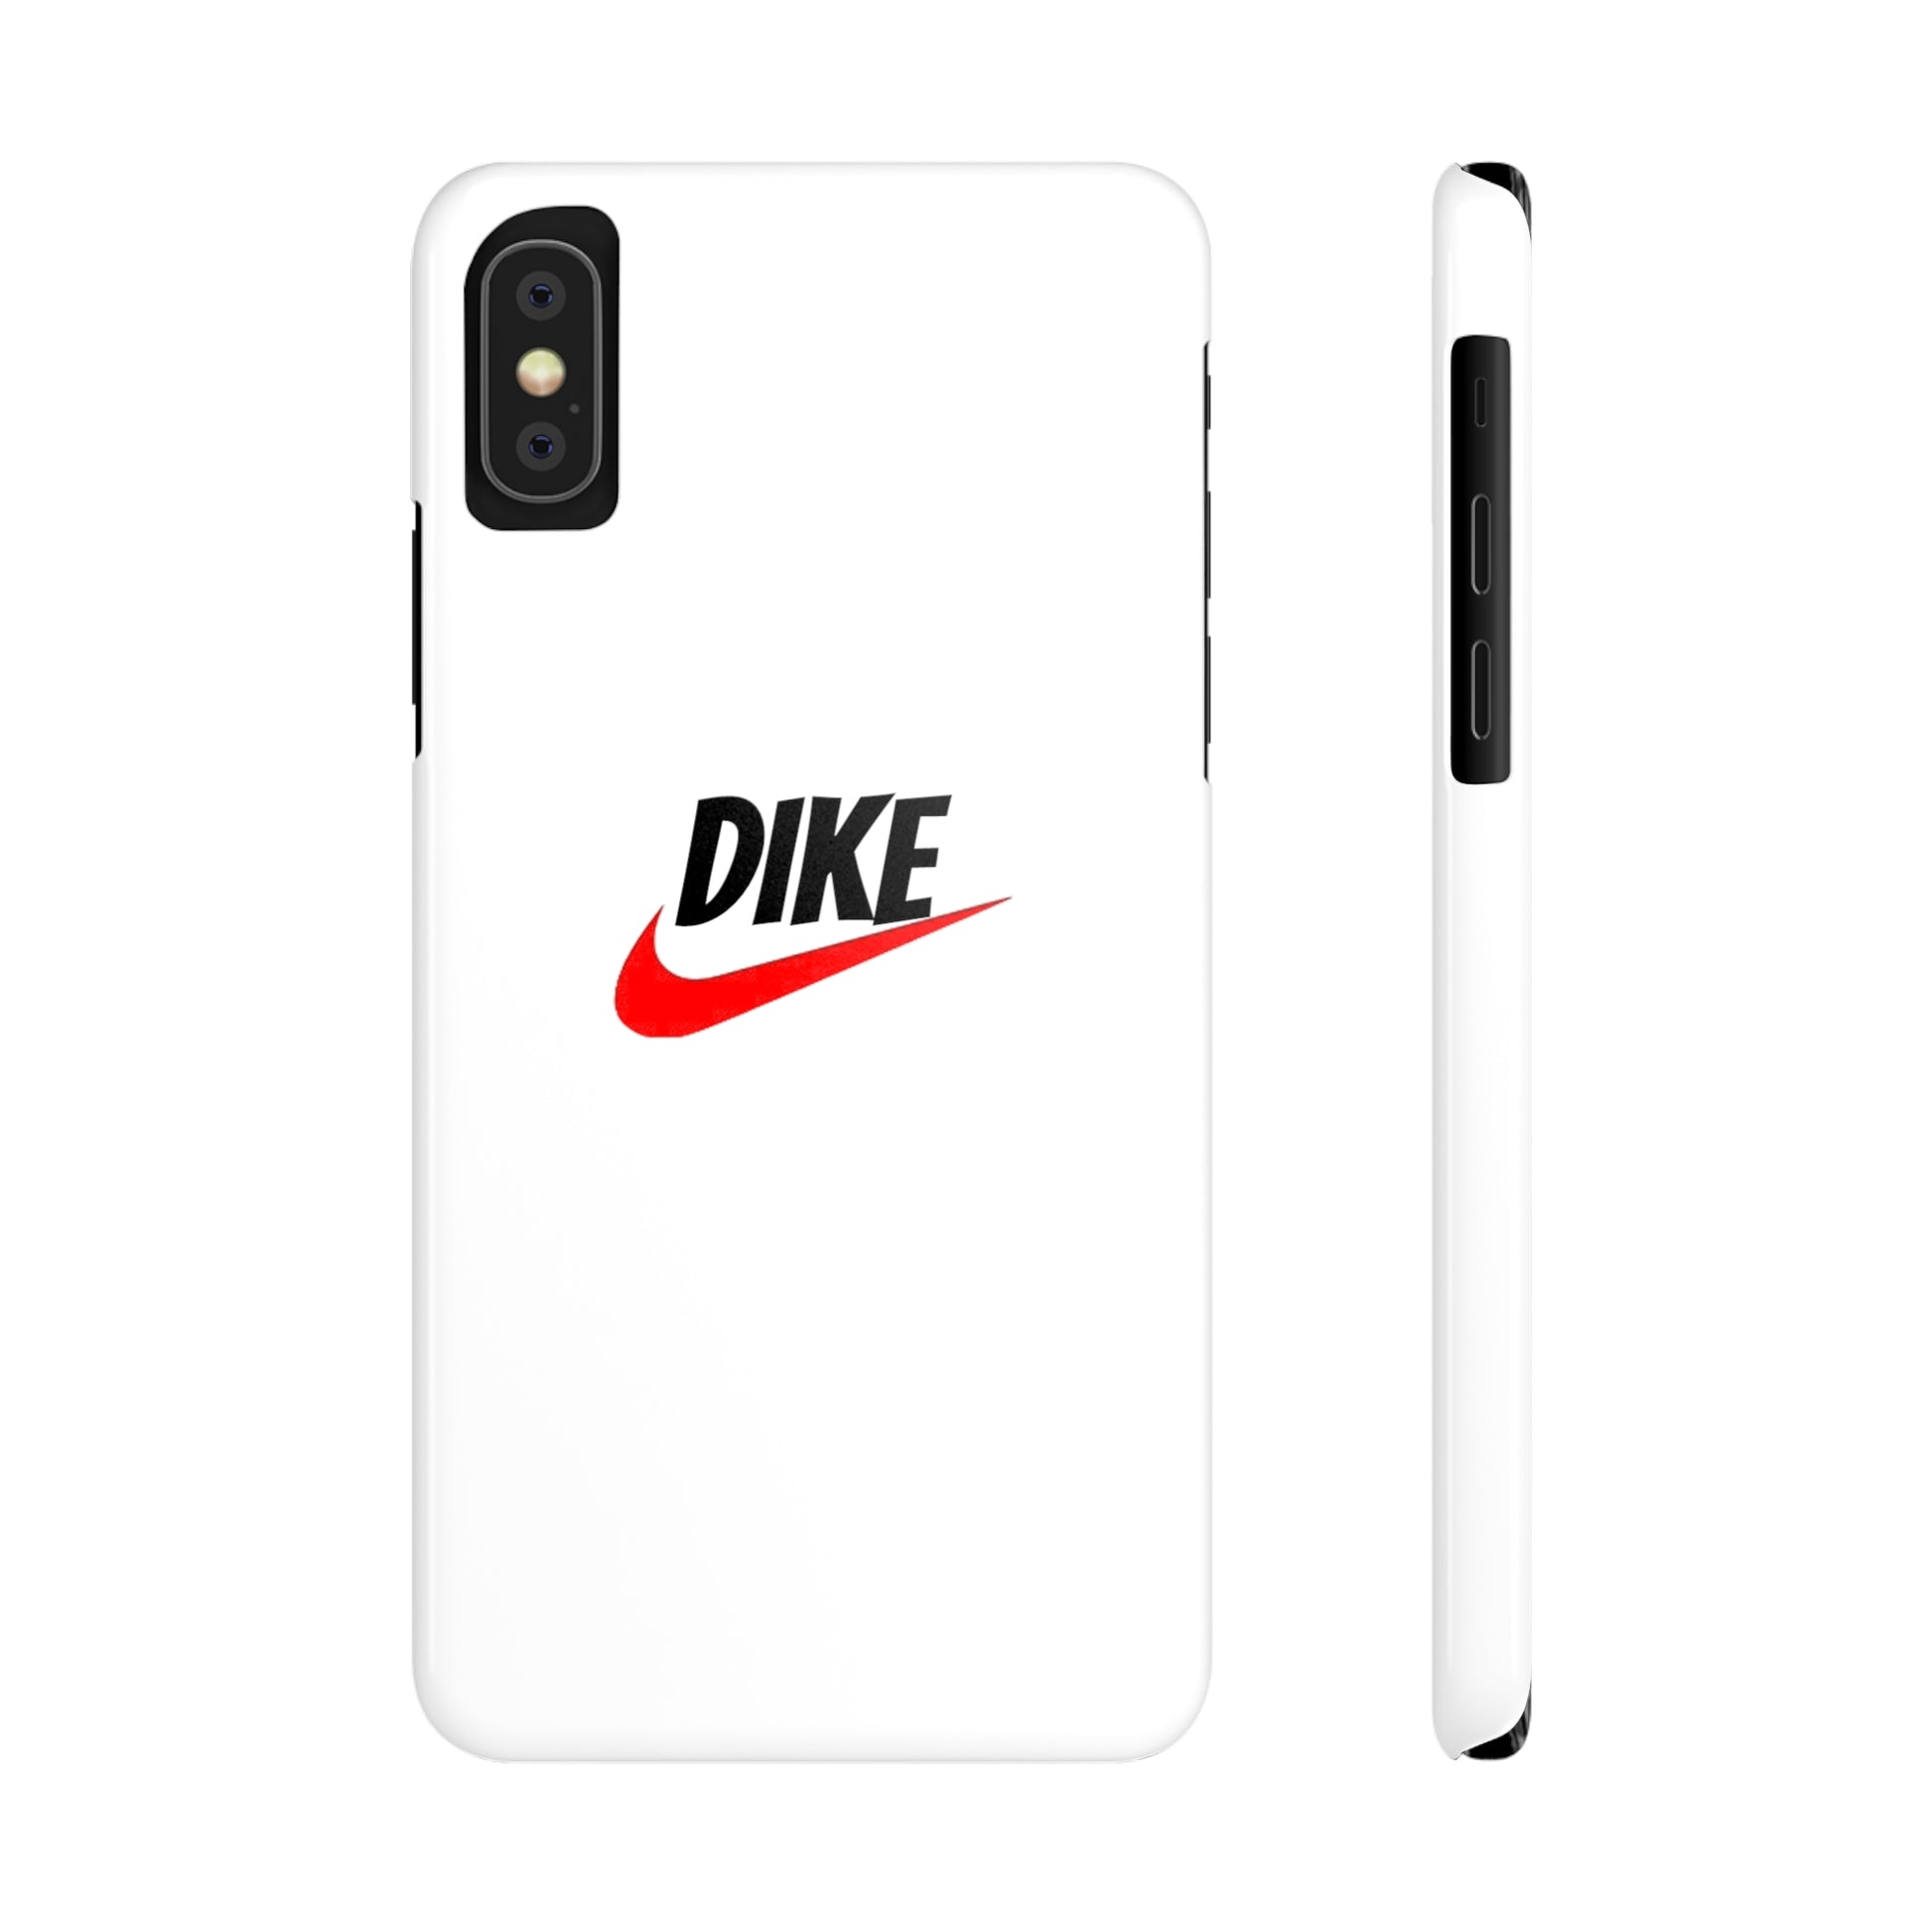 "Dike" MagStrong Phone Cases iPhone XS